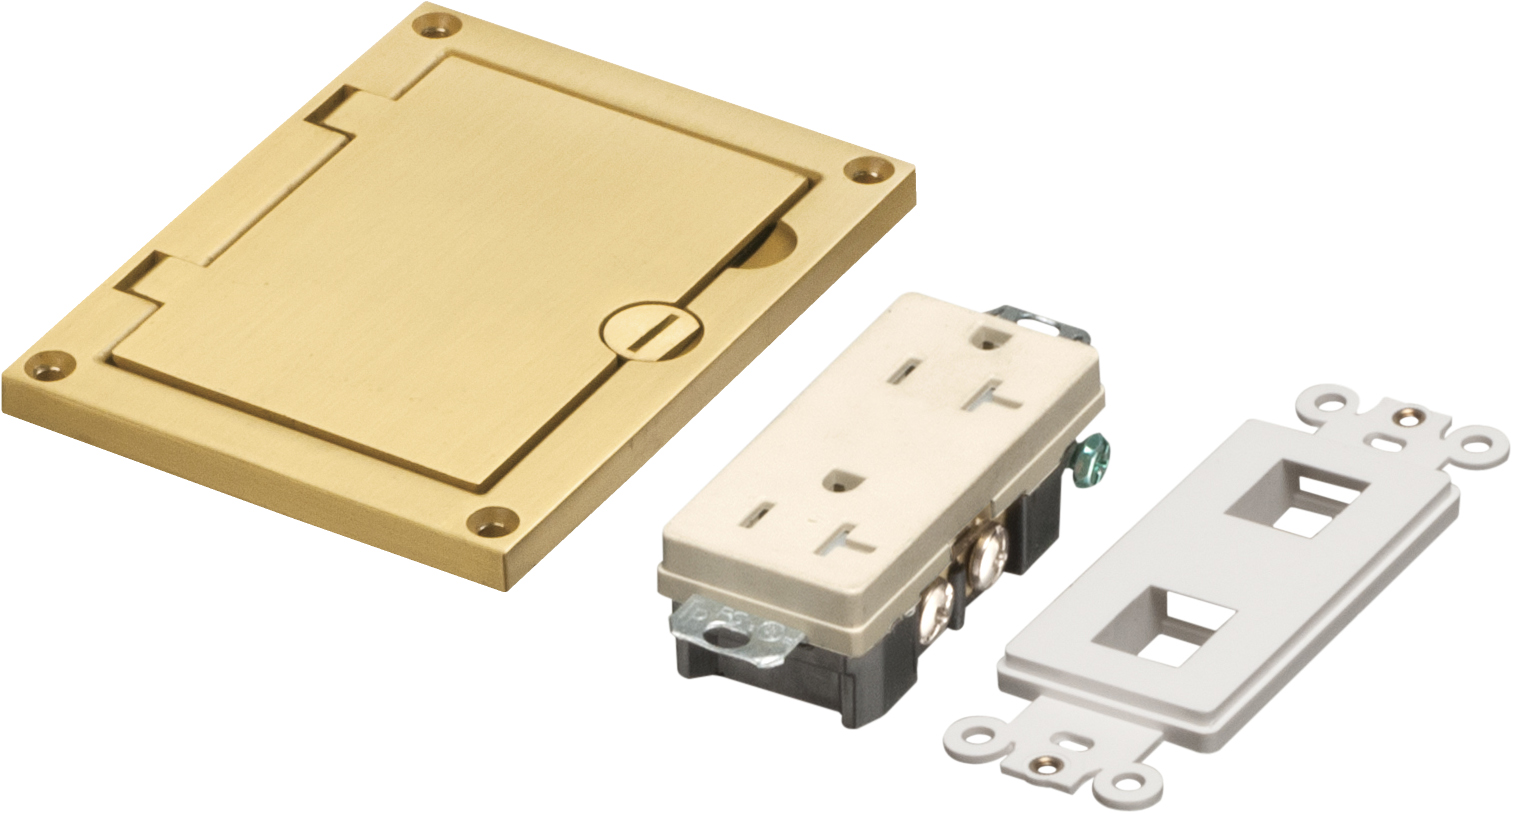 Brass single gang cover kit with Flip lid cover. Includes (1) 20A decorator style receptacle, (1) gasket.